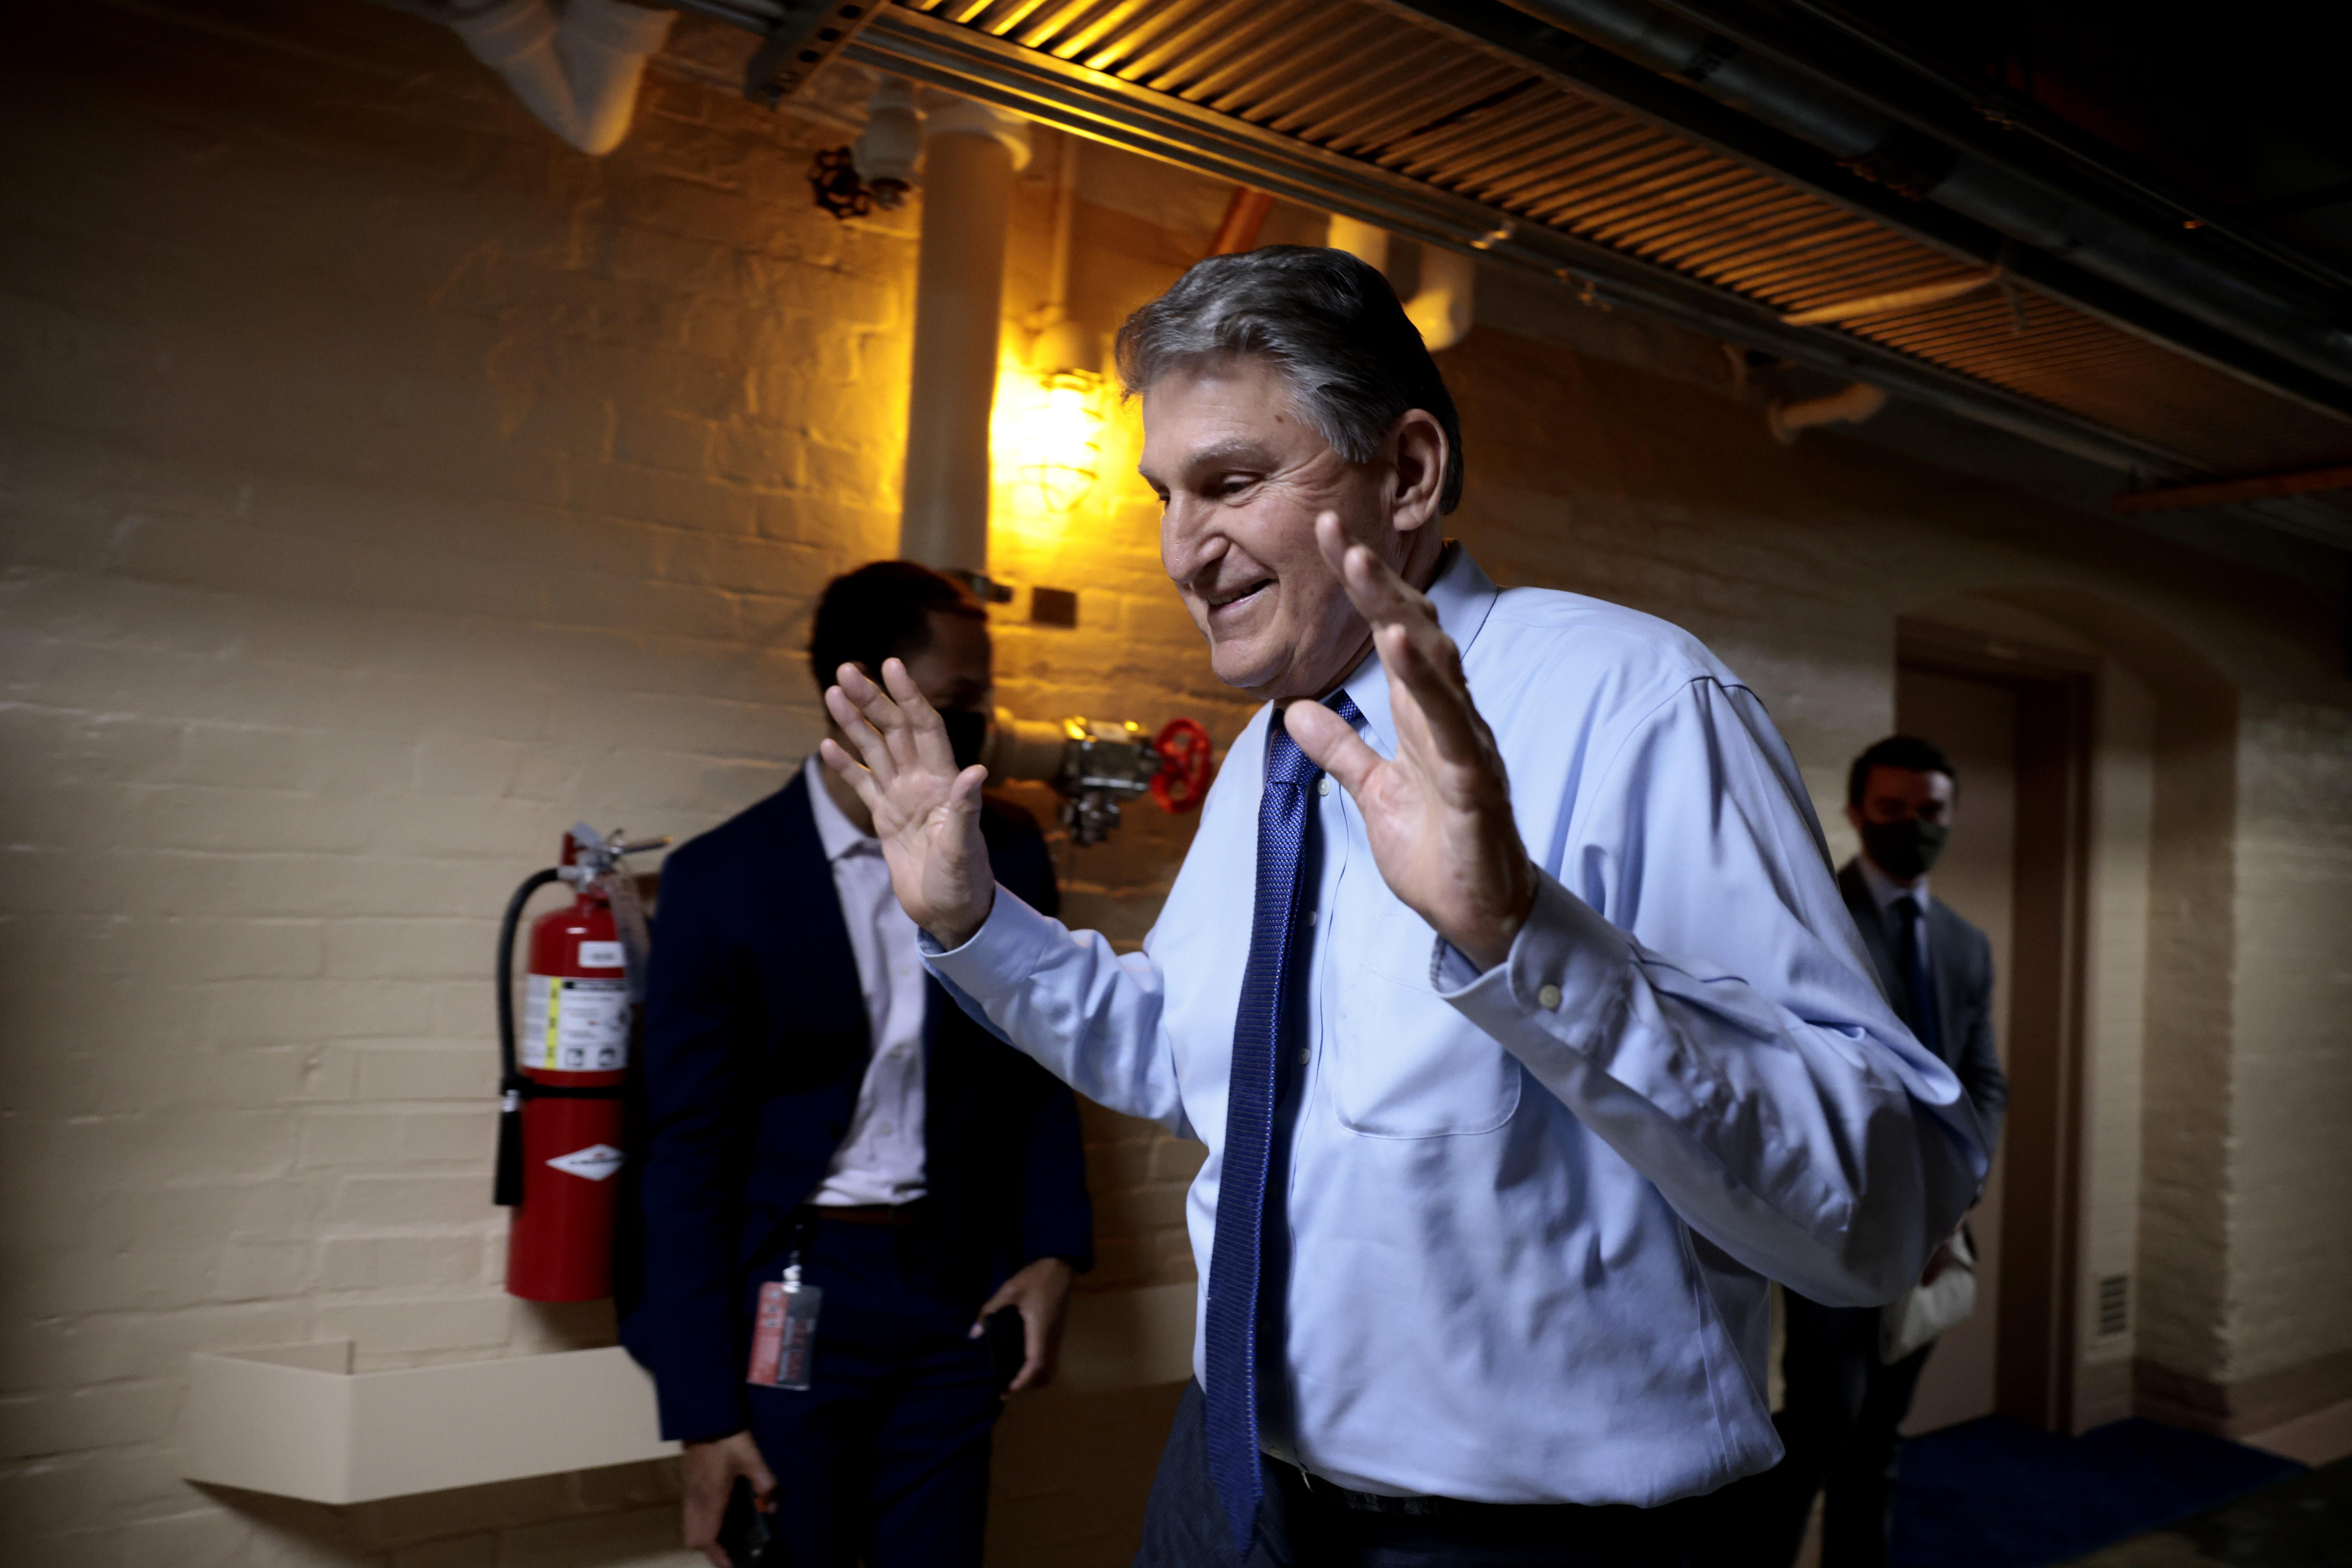 Manchin smiling and holding his hands up in front of him as he walks in a dim hallway